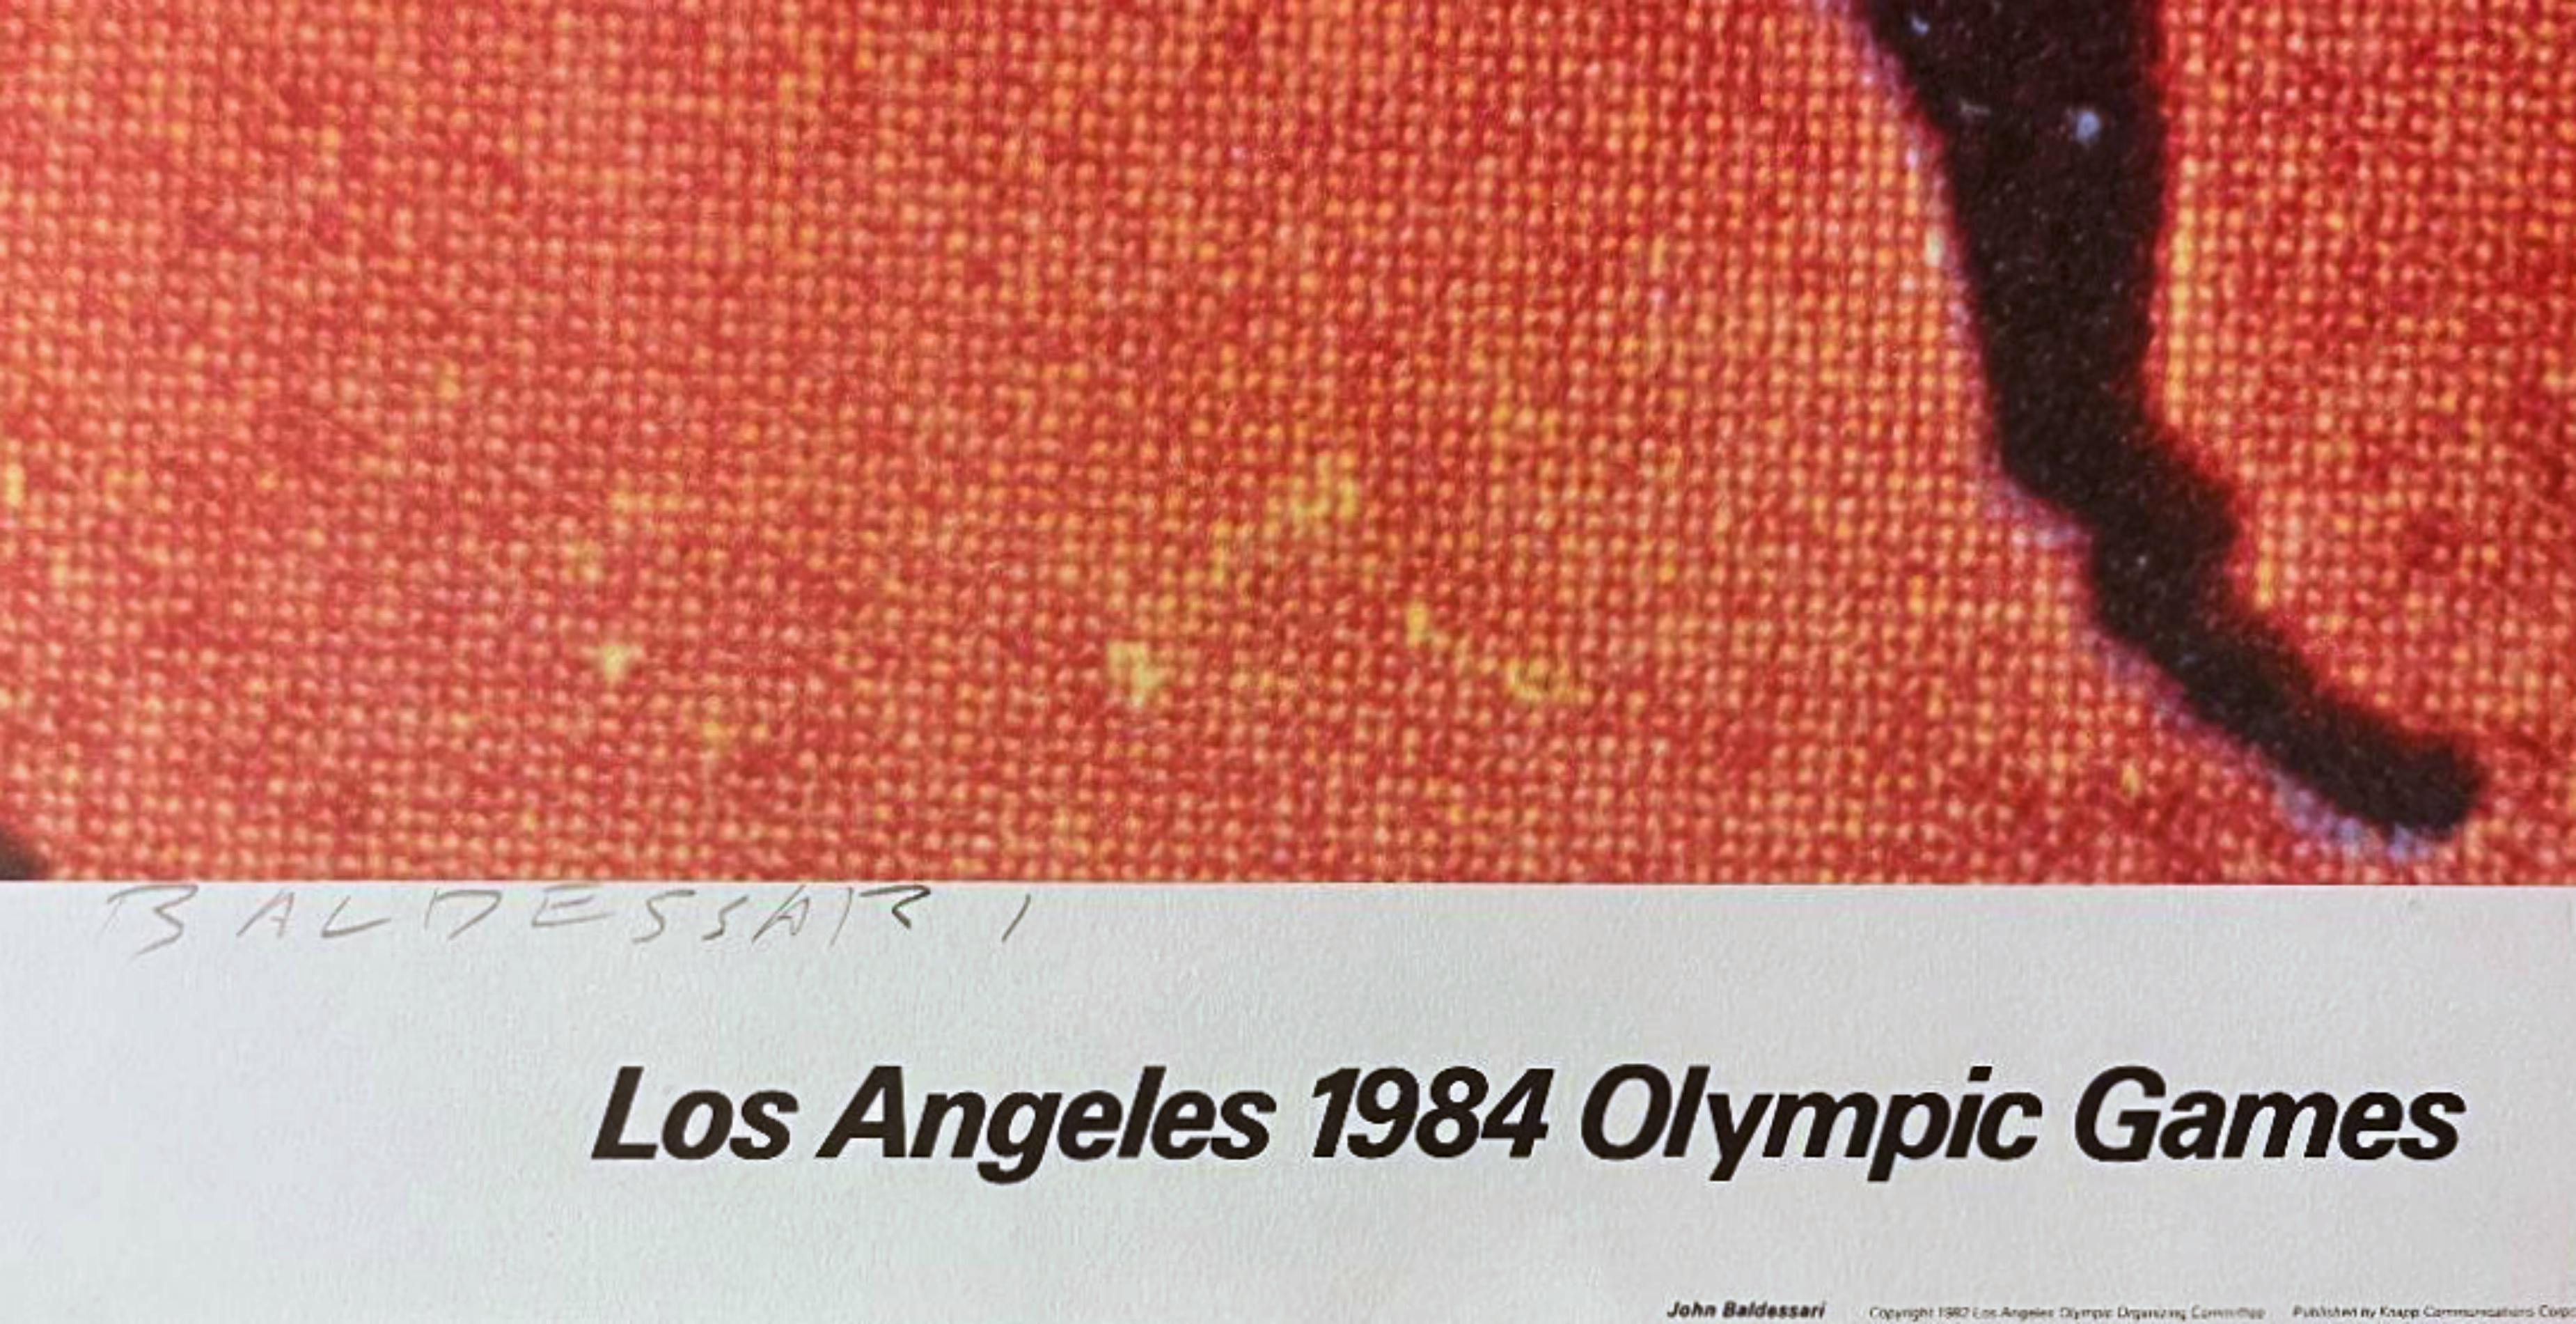 The Sprinters, for the 1984 Los Angeles Olympics, with official COA - Conceptual Print by John Baldessari